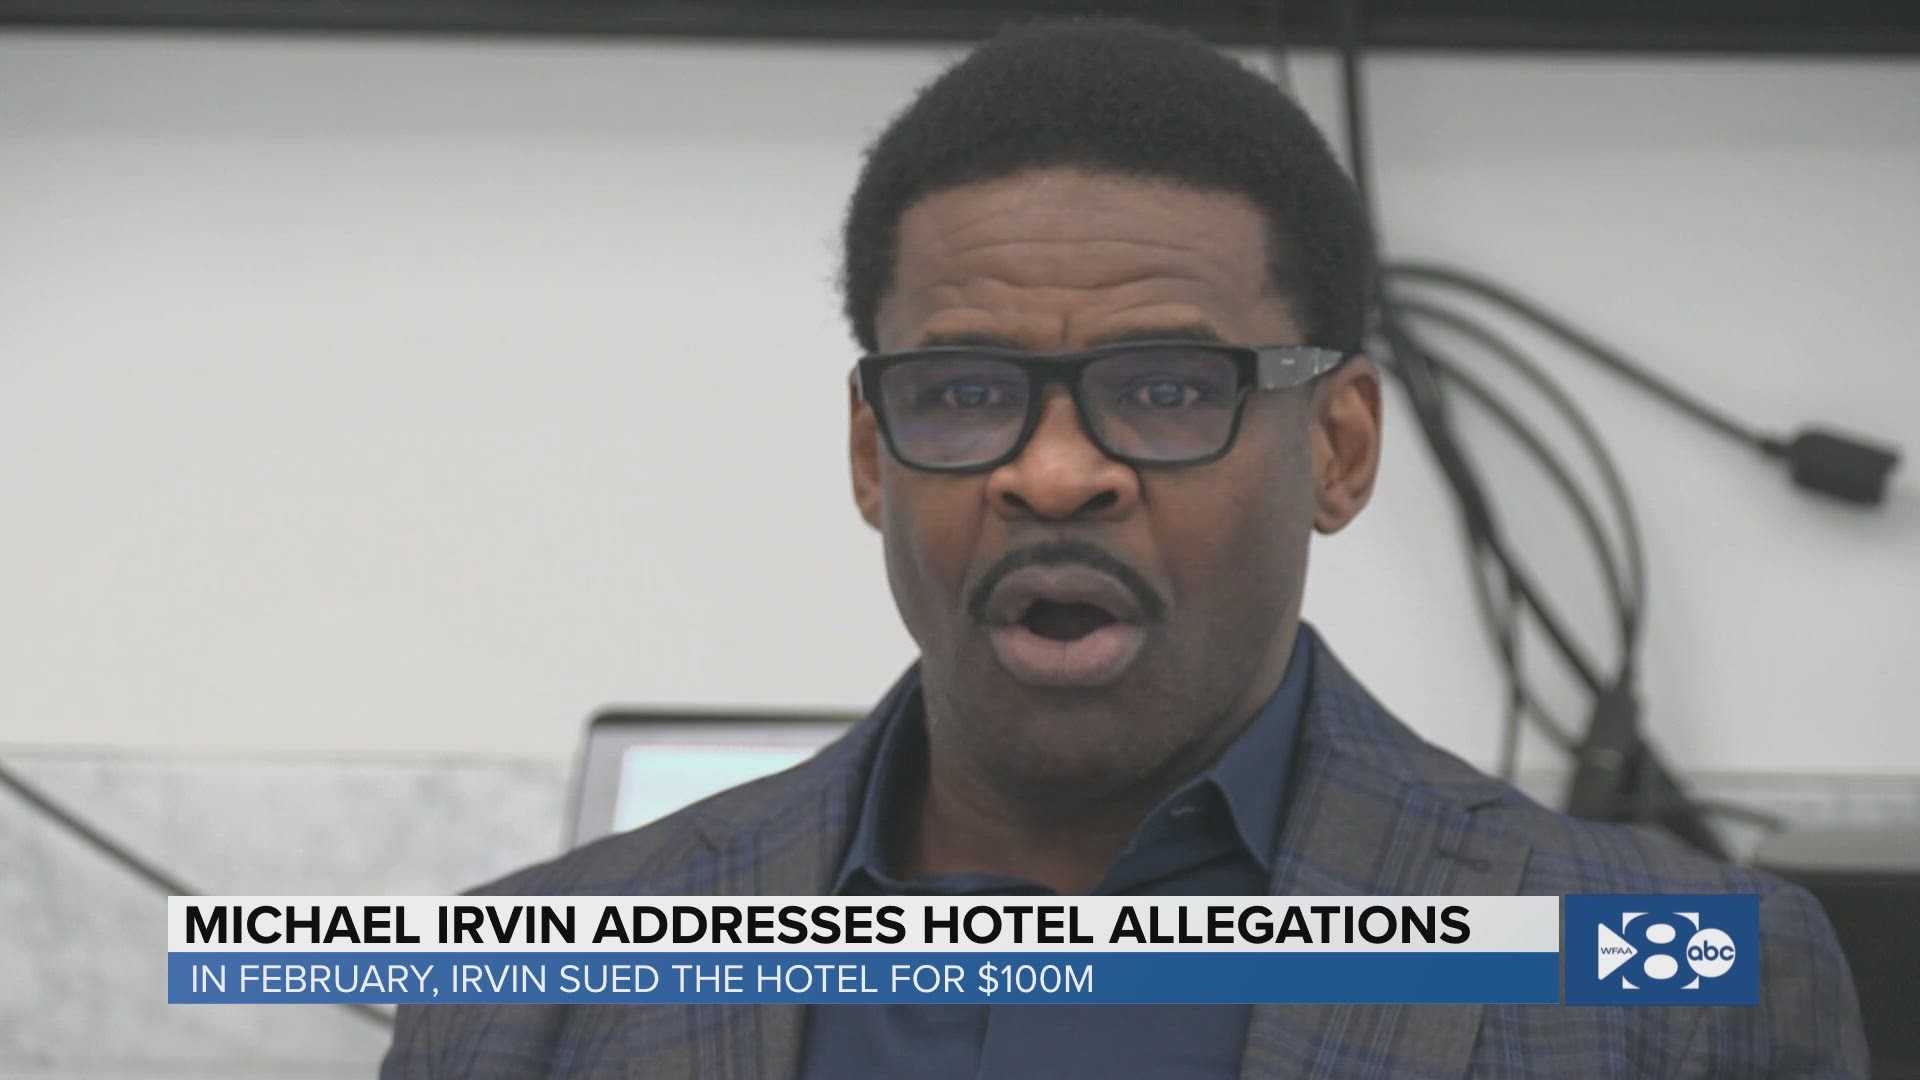 Dallas Cowboys Hall of Fame Michael Irvin responding to hotel allegations that got him sent home from Super Bowl coverage in Arizona.